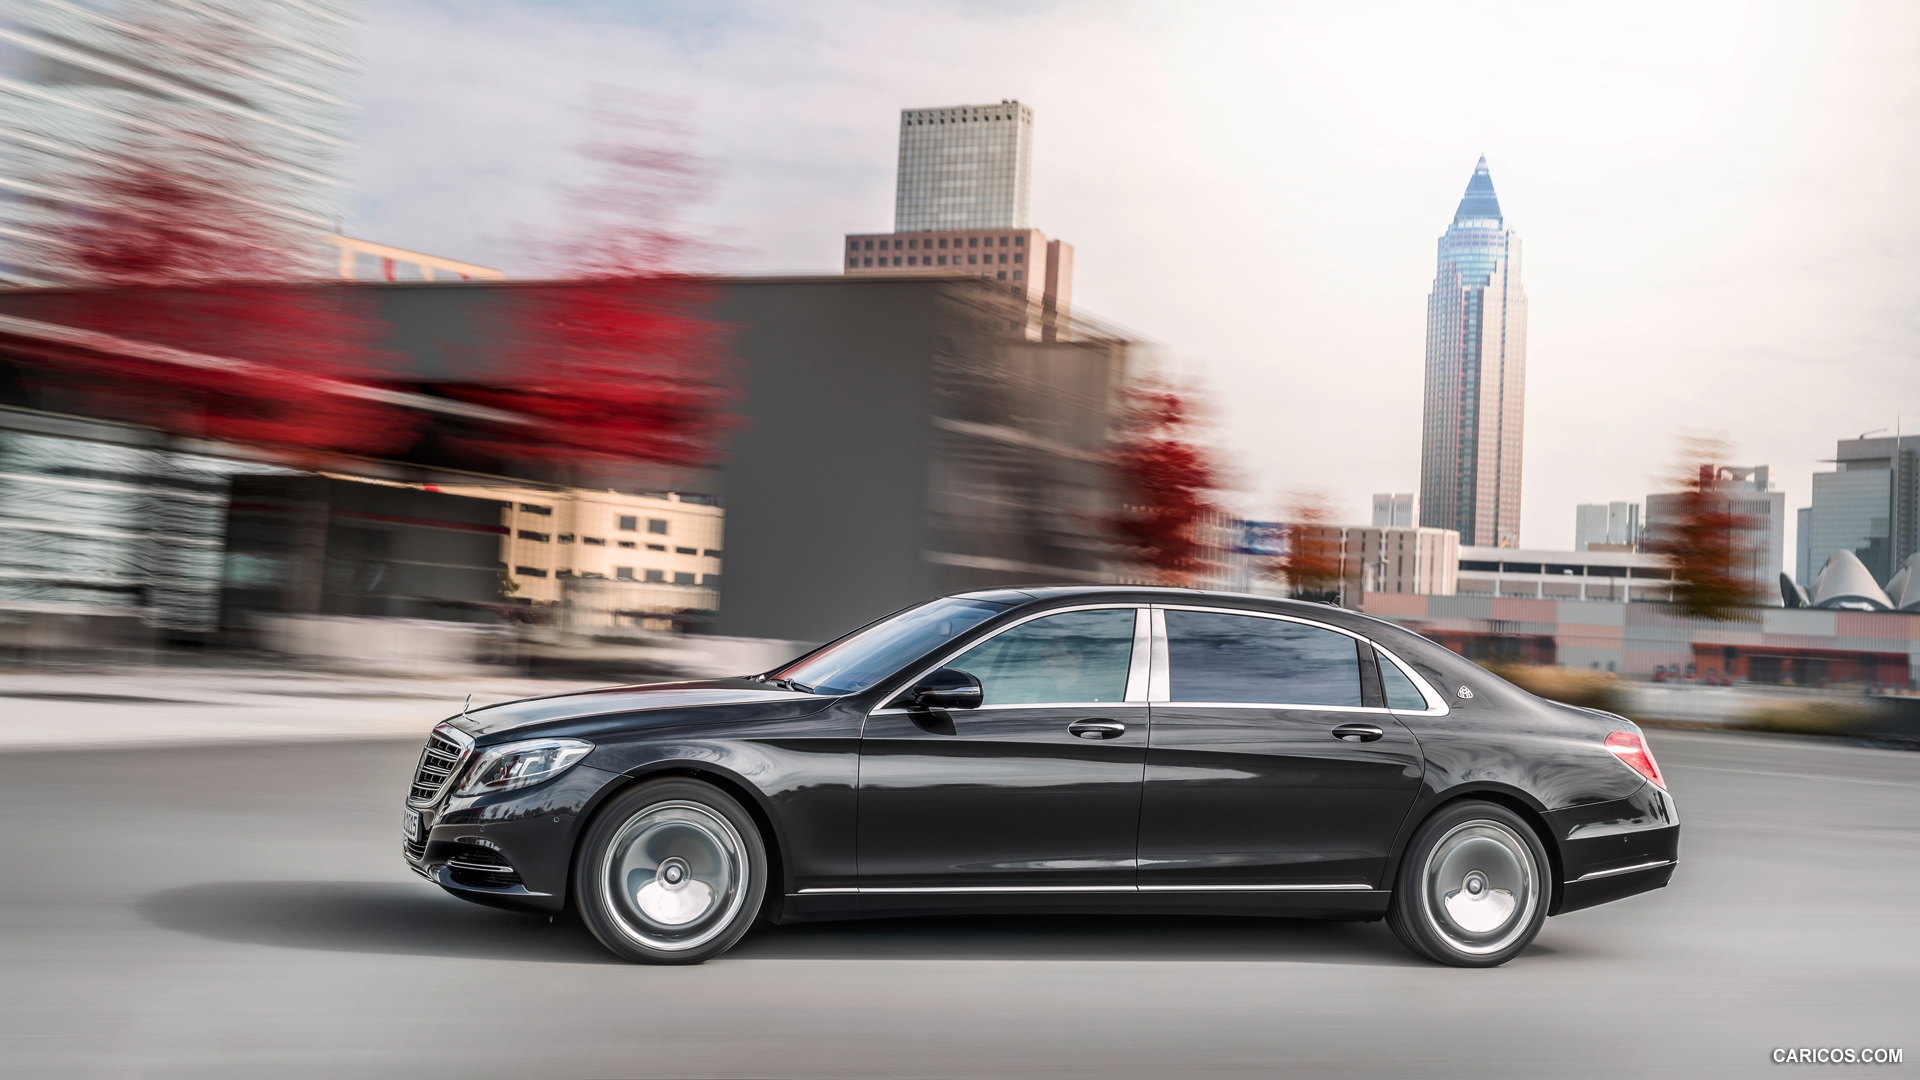 2016 Mercedes-Maybach S-Class S600 - Side, #15 of 225